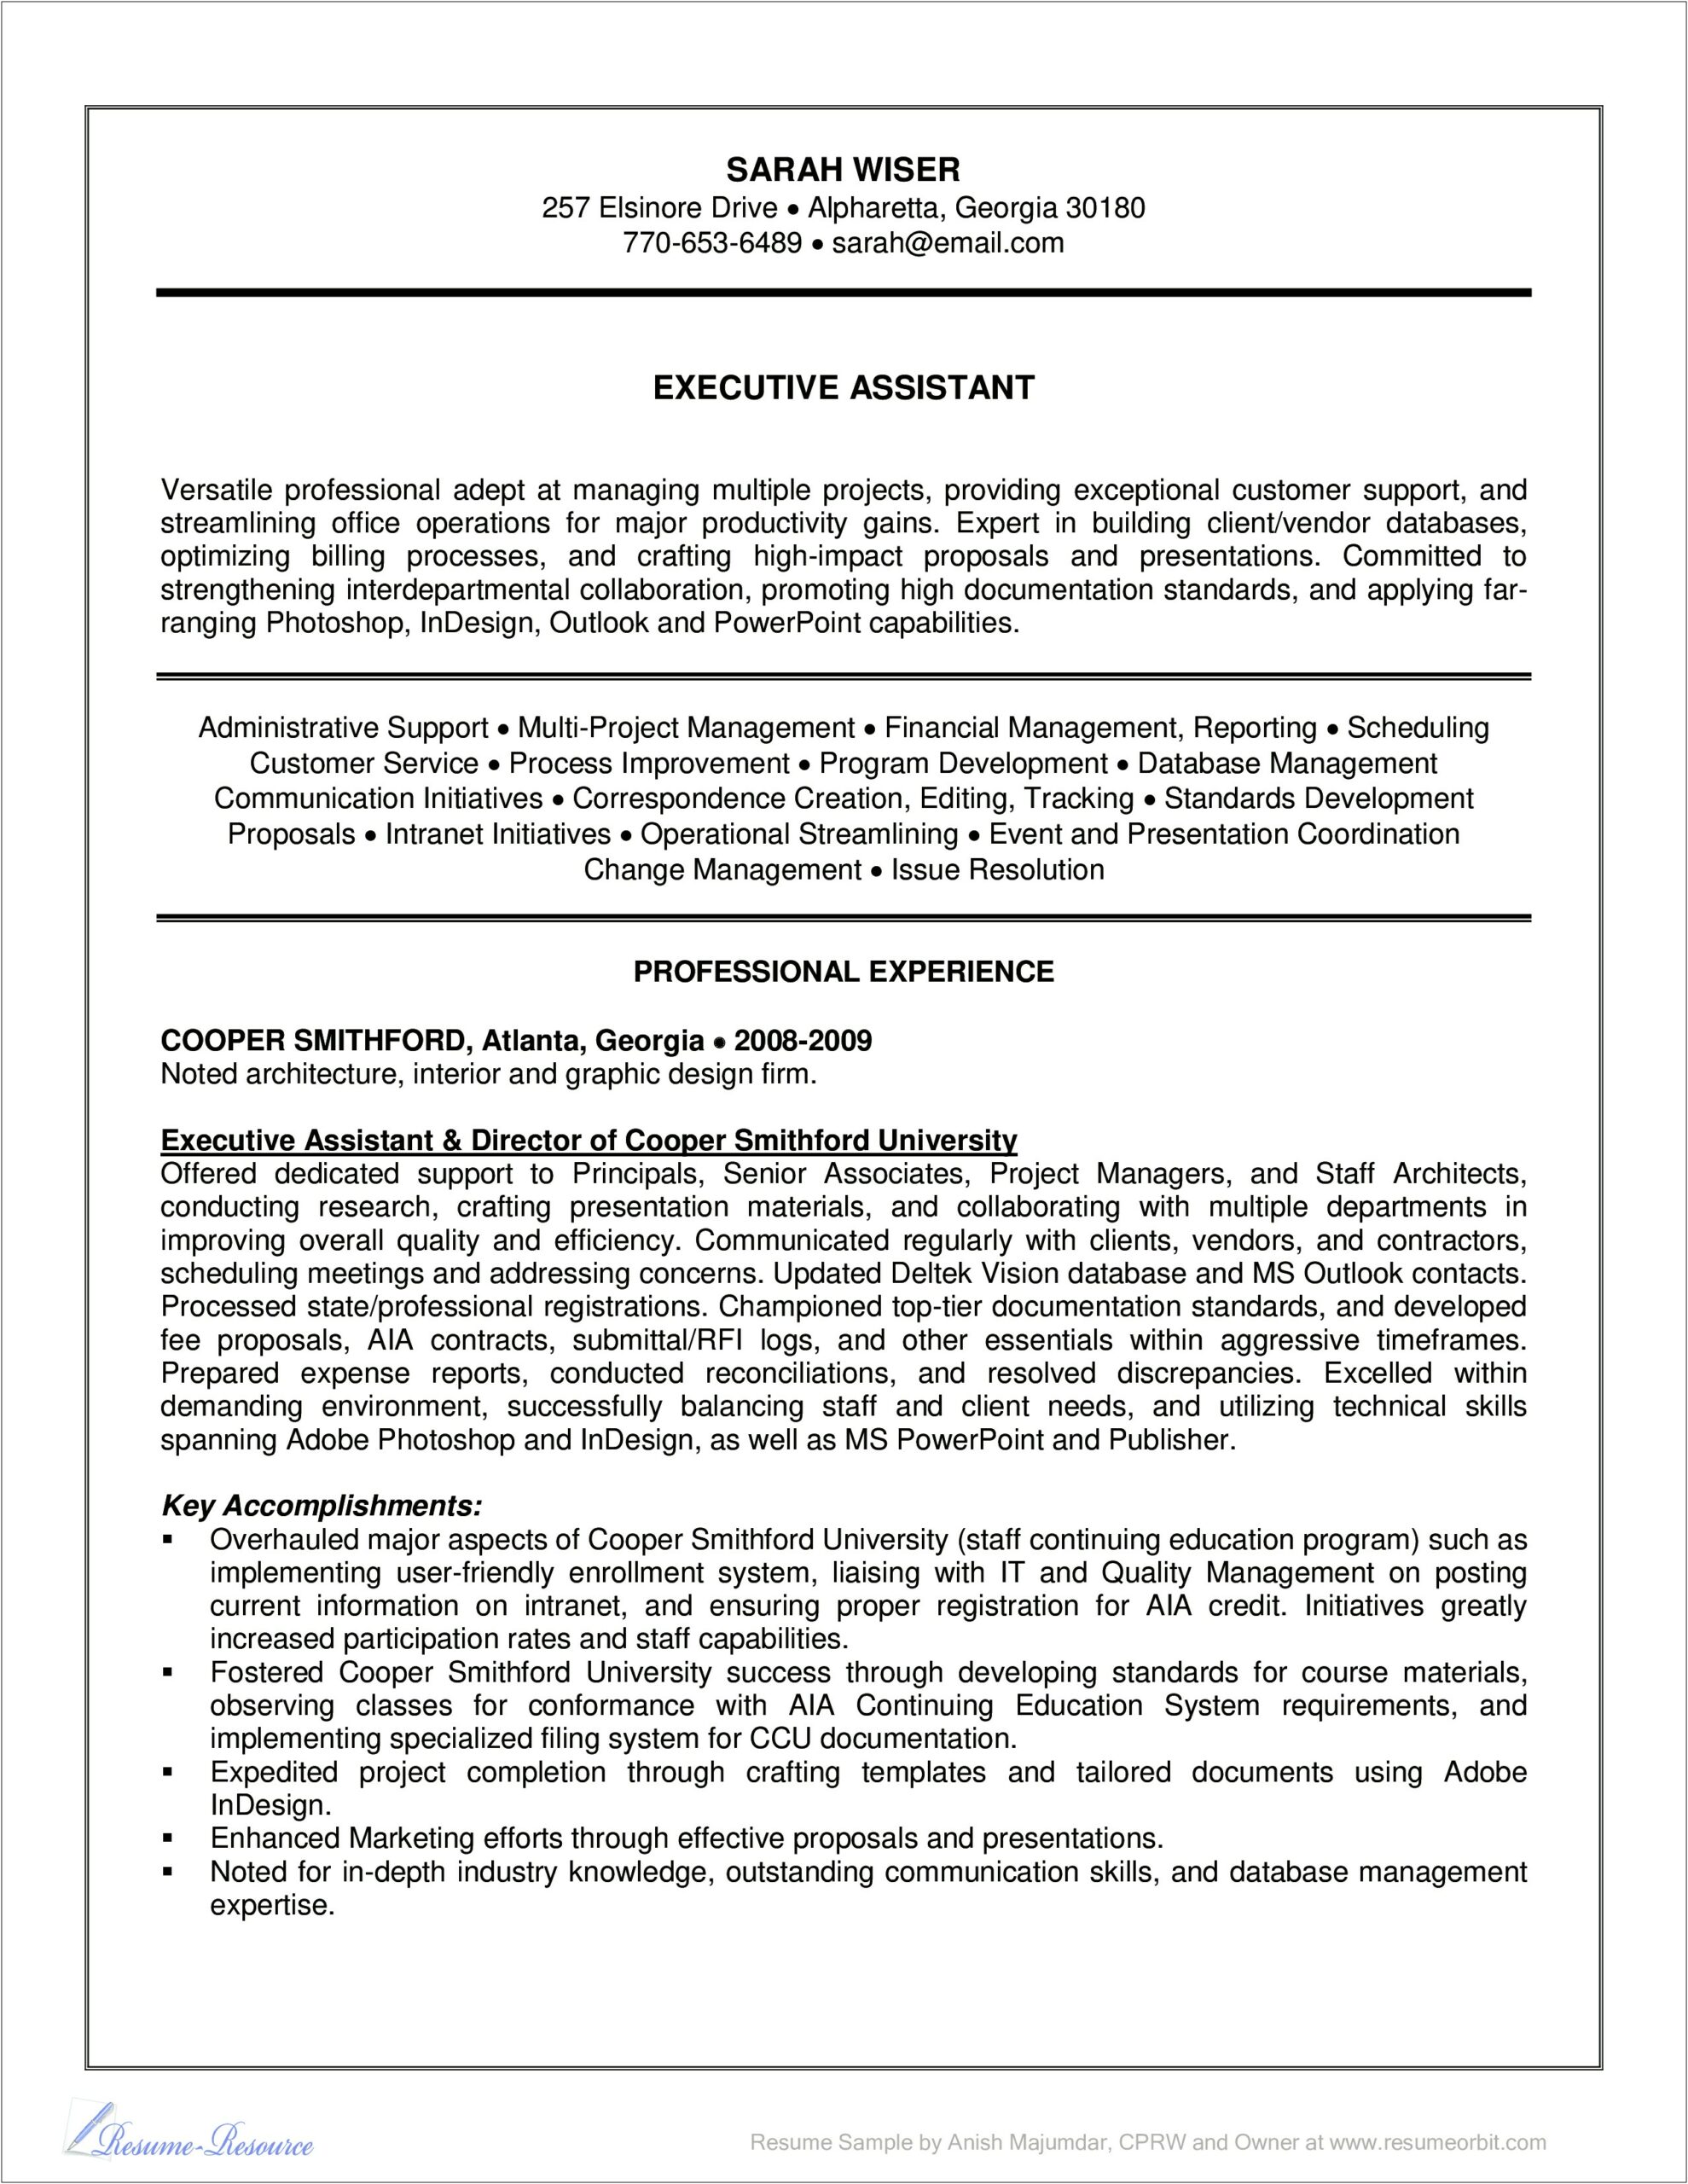 Examples Of Professional Administrative Assistant Resumes